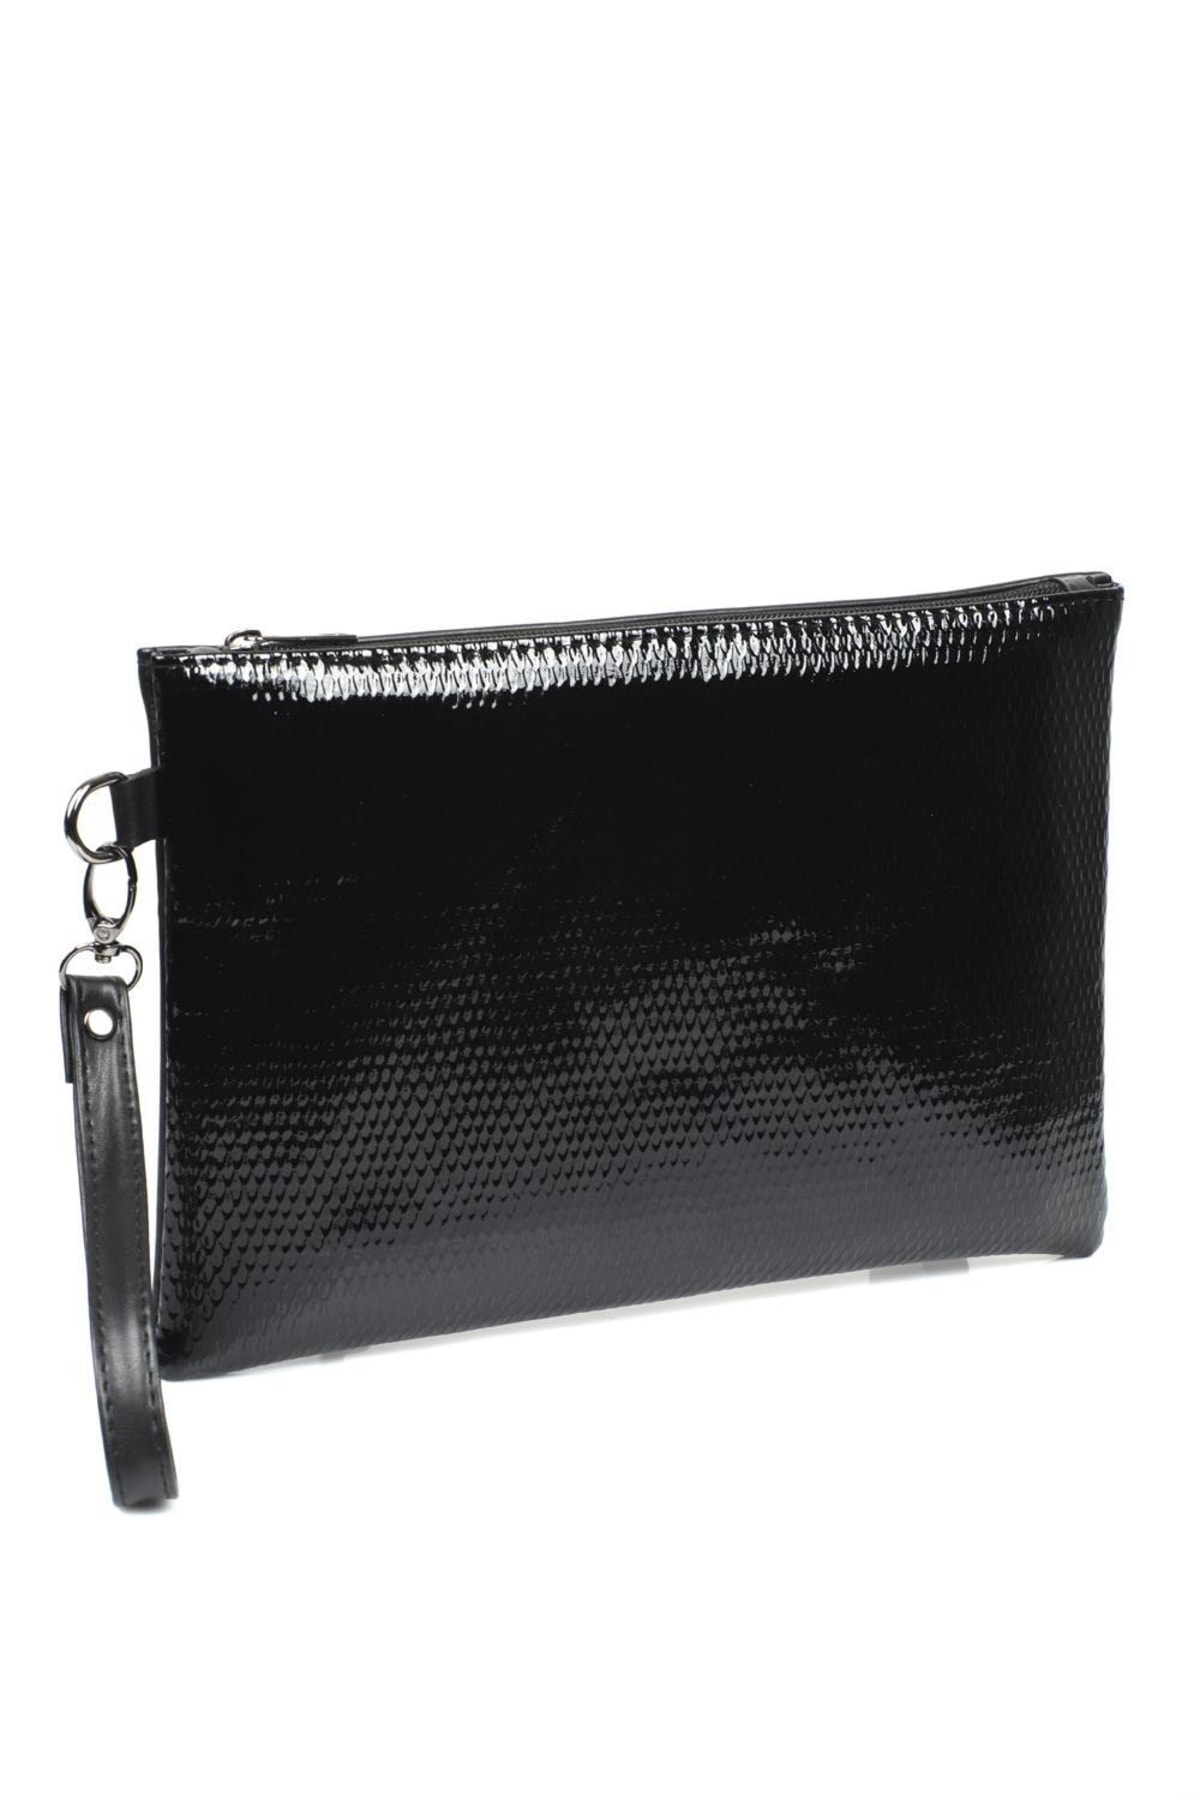 Levně Capone Outfitters Patent Leather Snake Patterned Paris Women's Clutch Bag